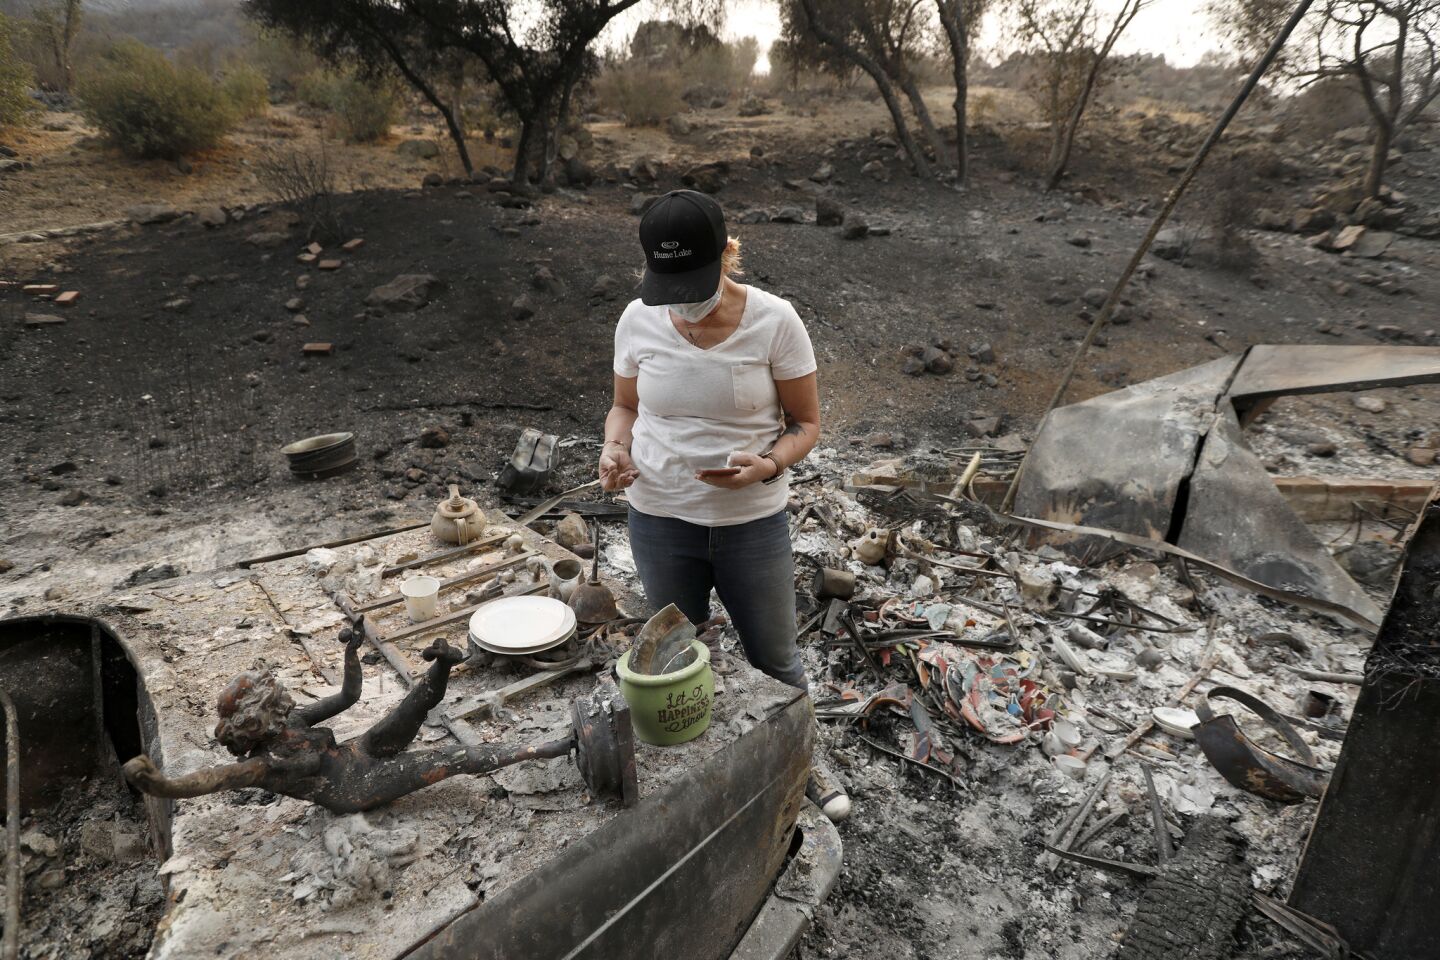 Lori Jackson, 52, looks for items that survived the fire in a mobile home park in Westlake Village.